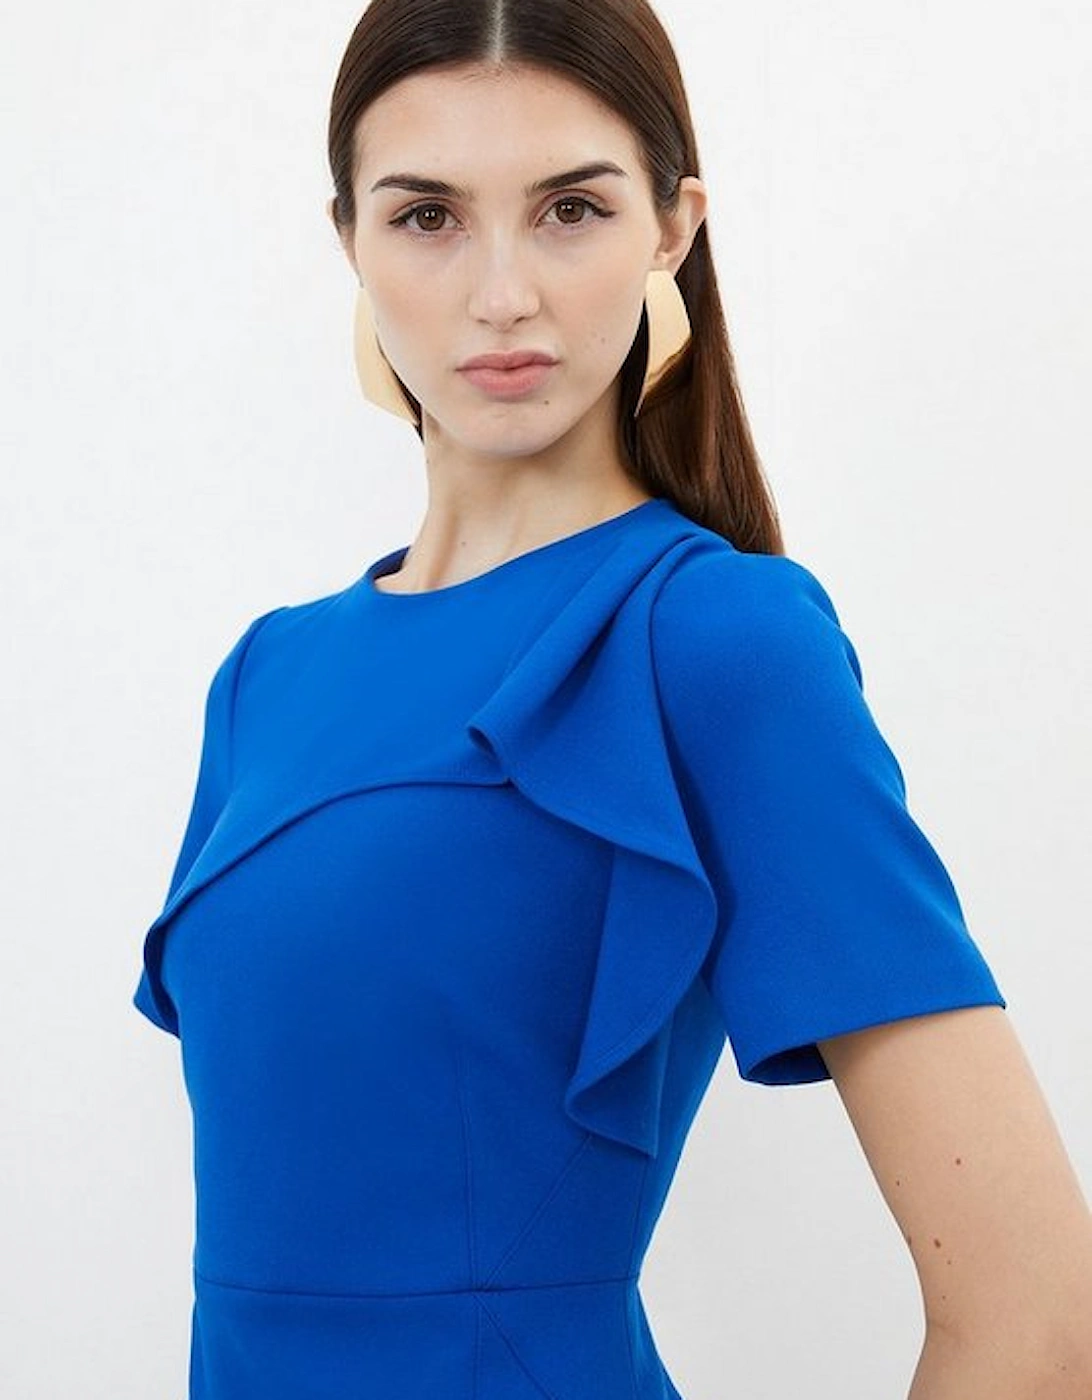 Tailored Structured Crepe Ruffle Detail Pencil Midi Dress